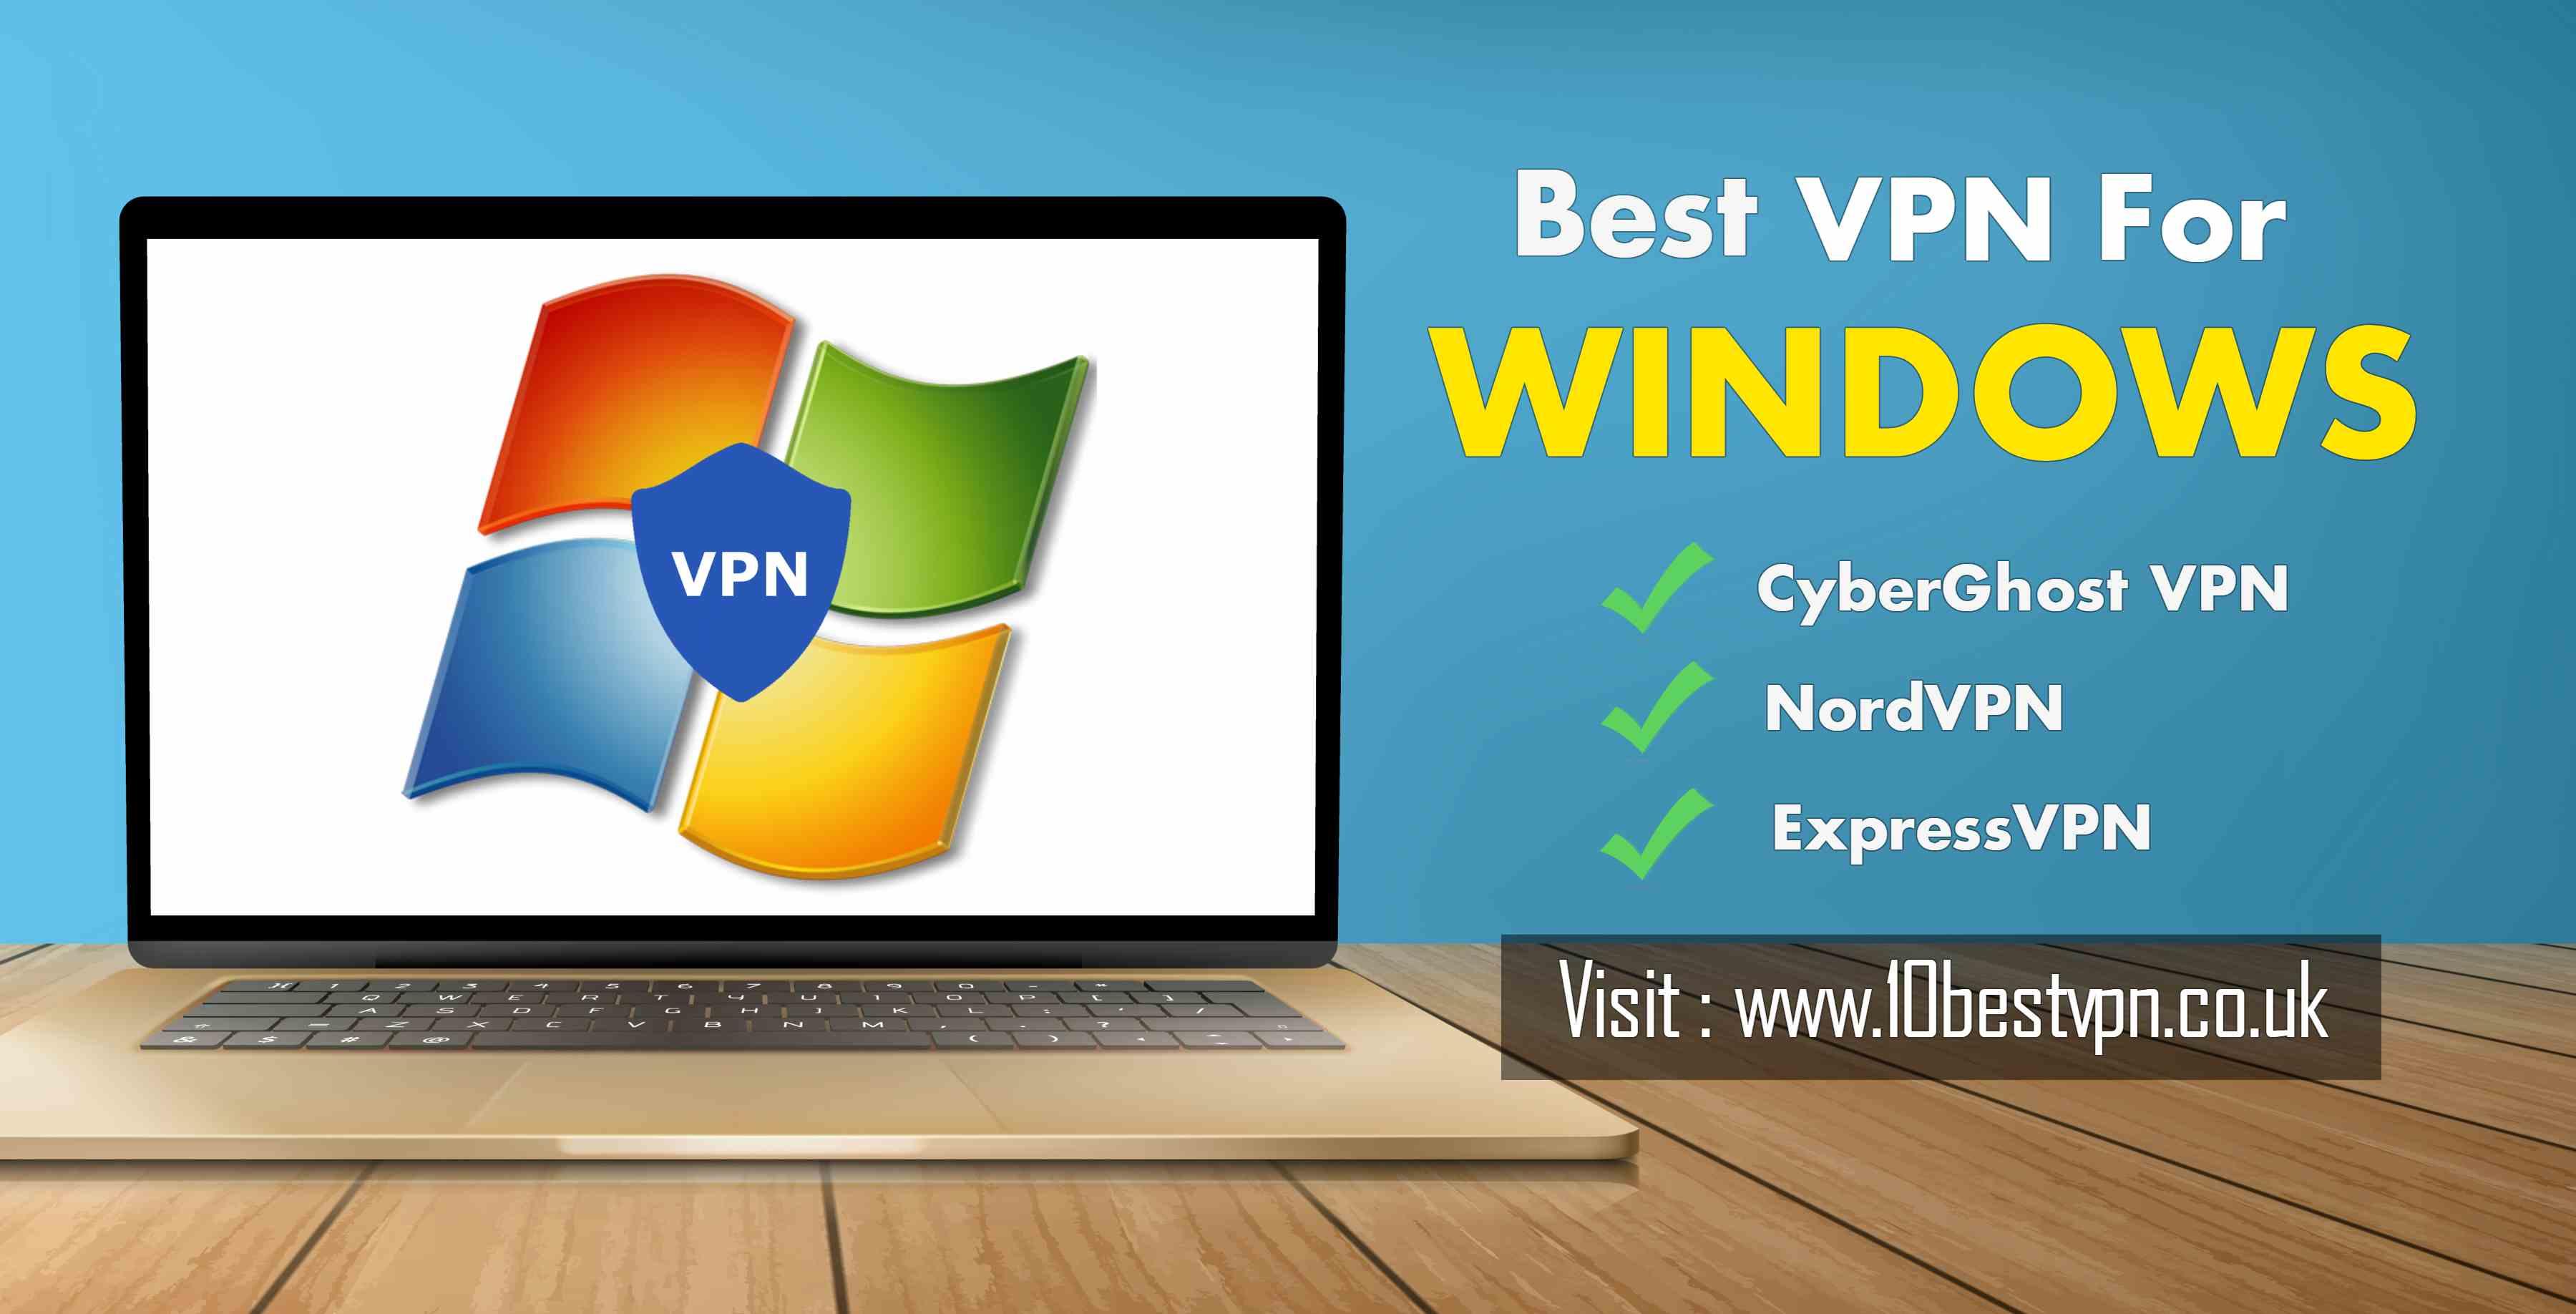 Image - Get the list of #BestVPNforWindows that completely able to secure your PC from hacking. These #BestVPNs are f...